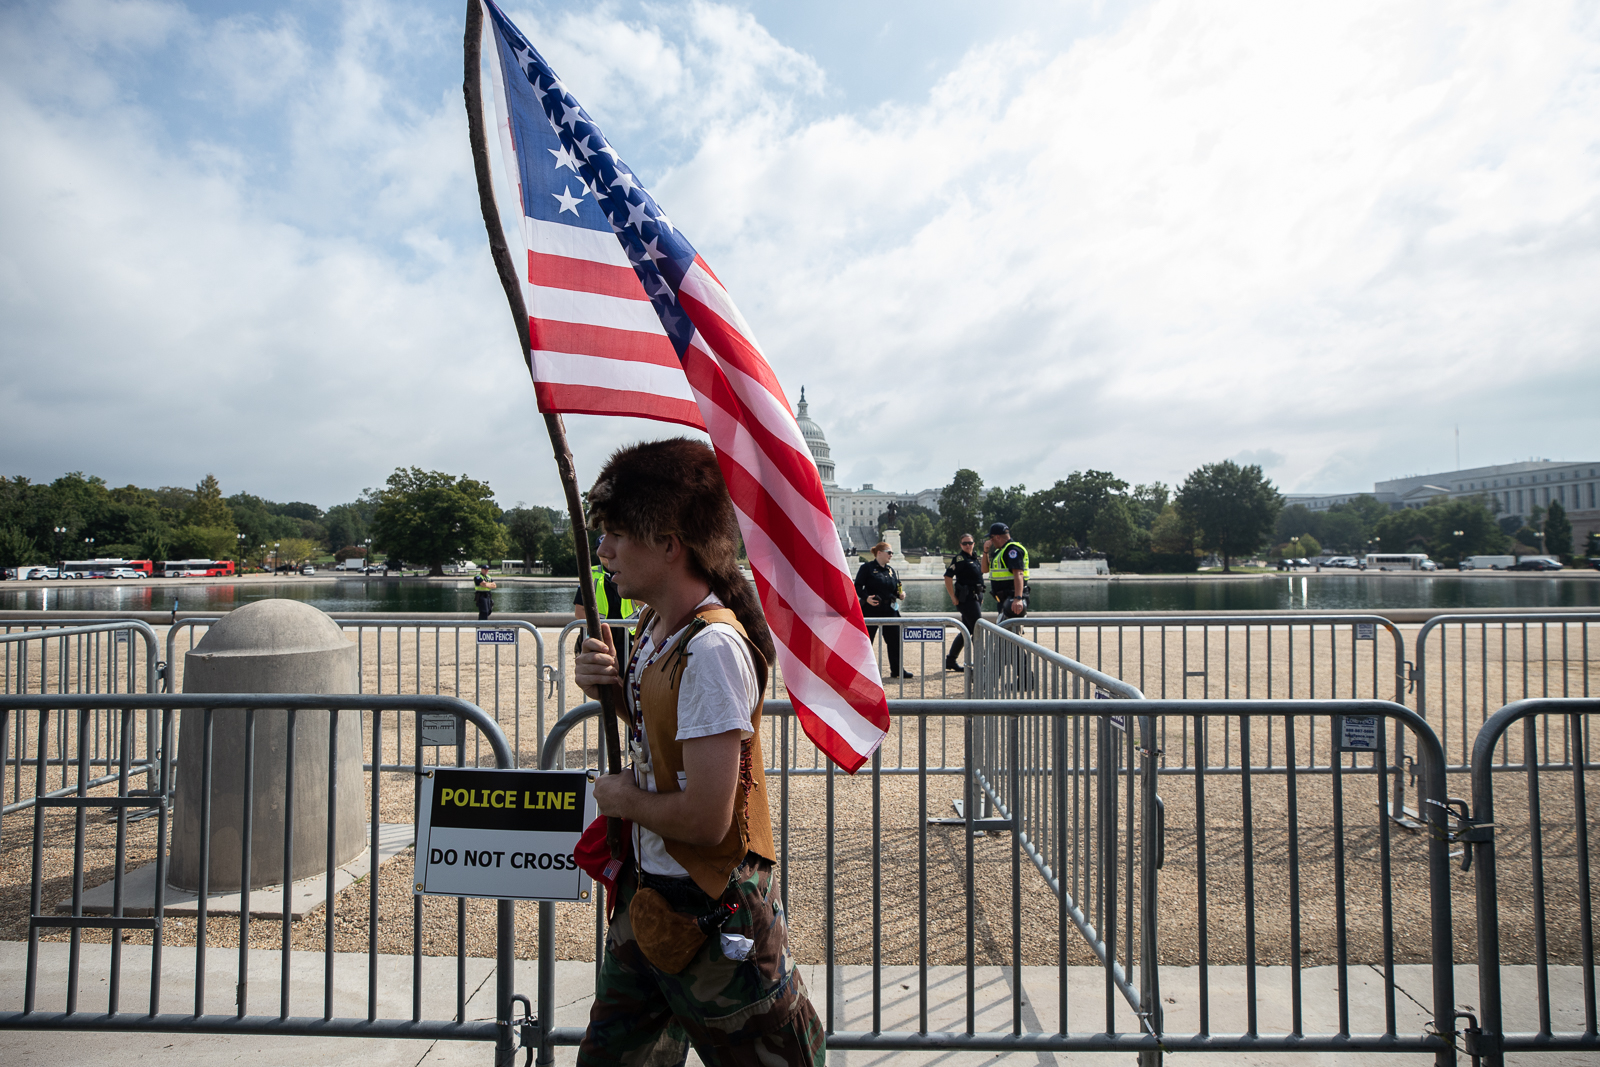 Several people attended the "Justice for J6" rally in Washington, D.C. in different costumes on September 18, 2021. ​(Kaylee Greenlee - Daily Caller News Foundation)